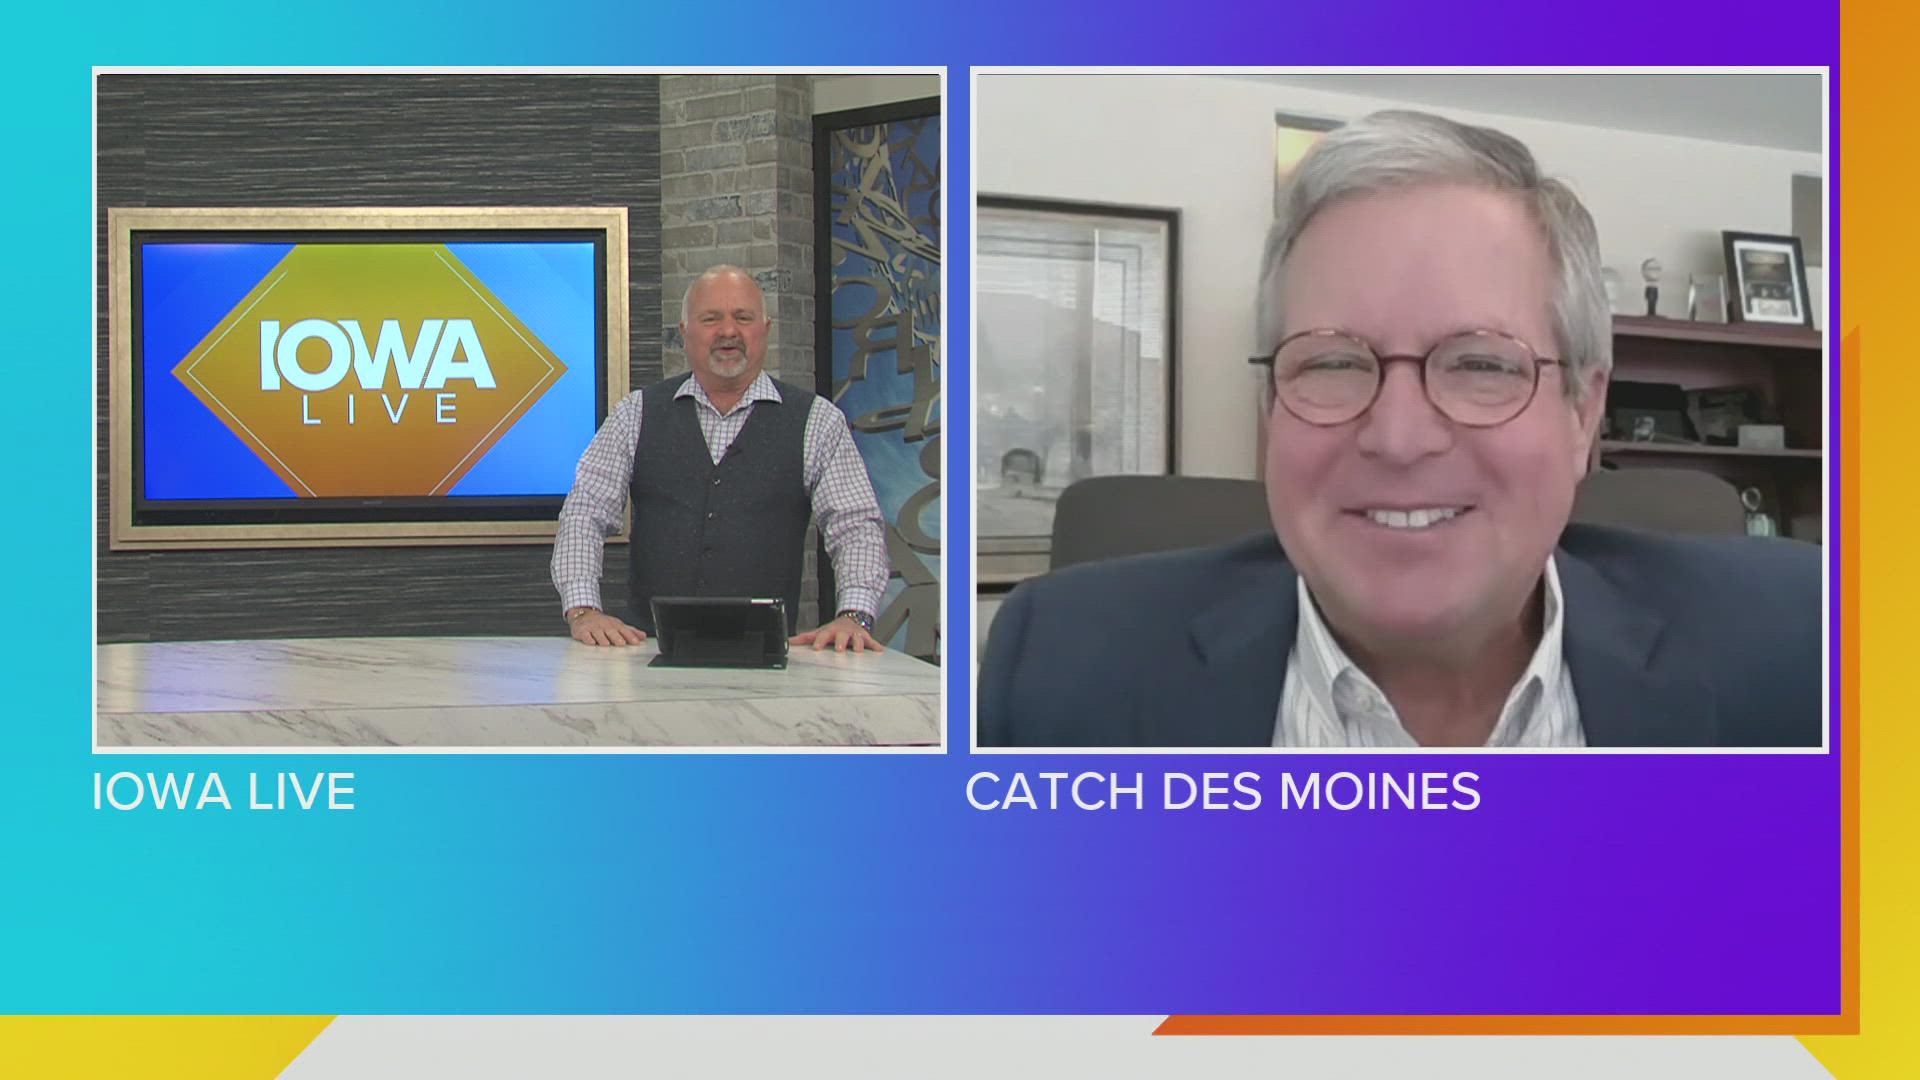 Greg Edwards, President/CEO of Catch Des Moines,  reminds us of some of the things happening around town including the Home Show, Hockey, Rodeo & Dome After Dark!